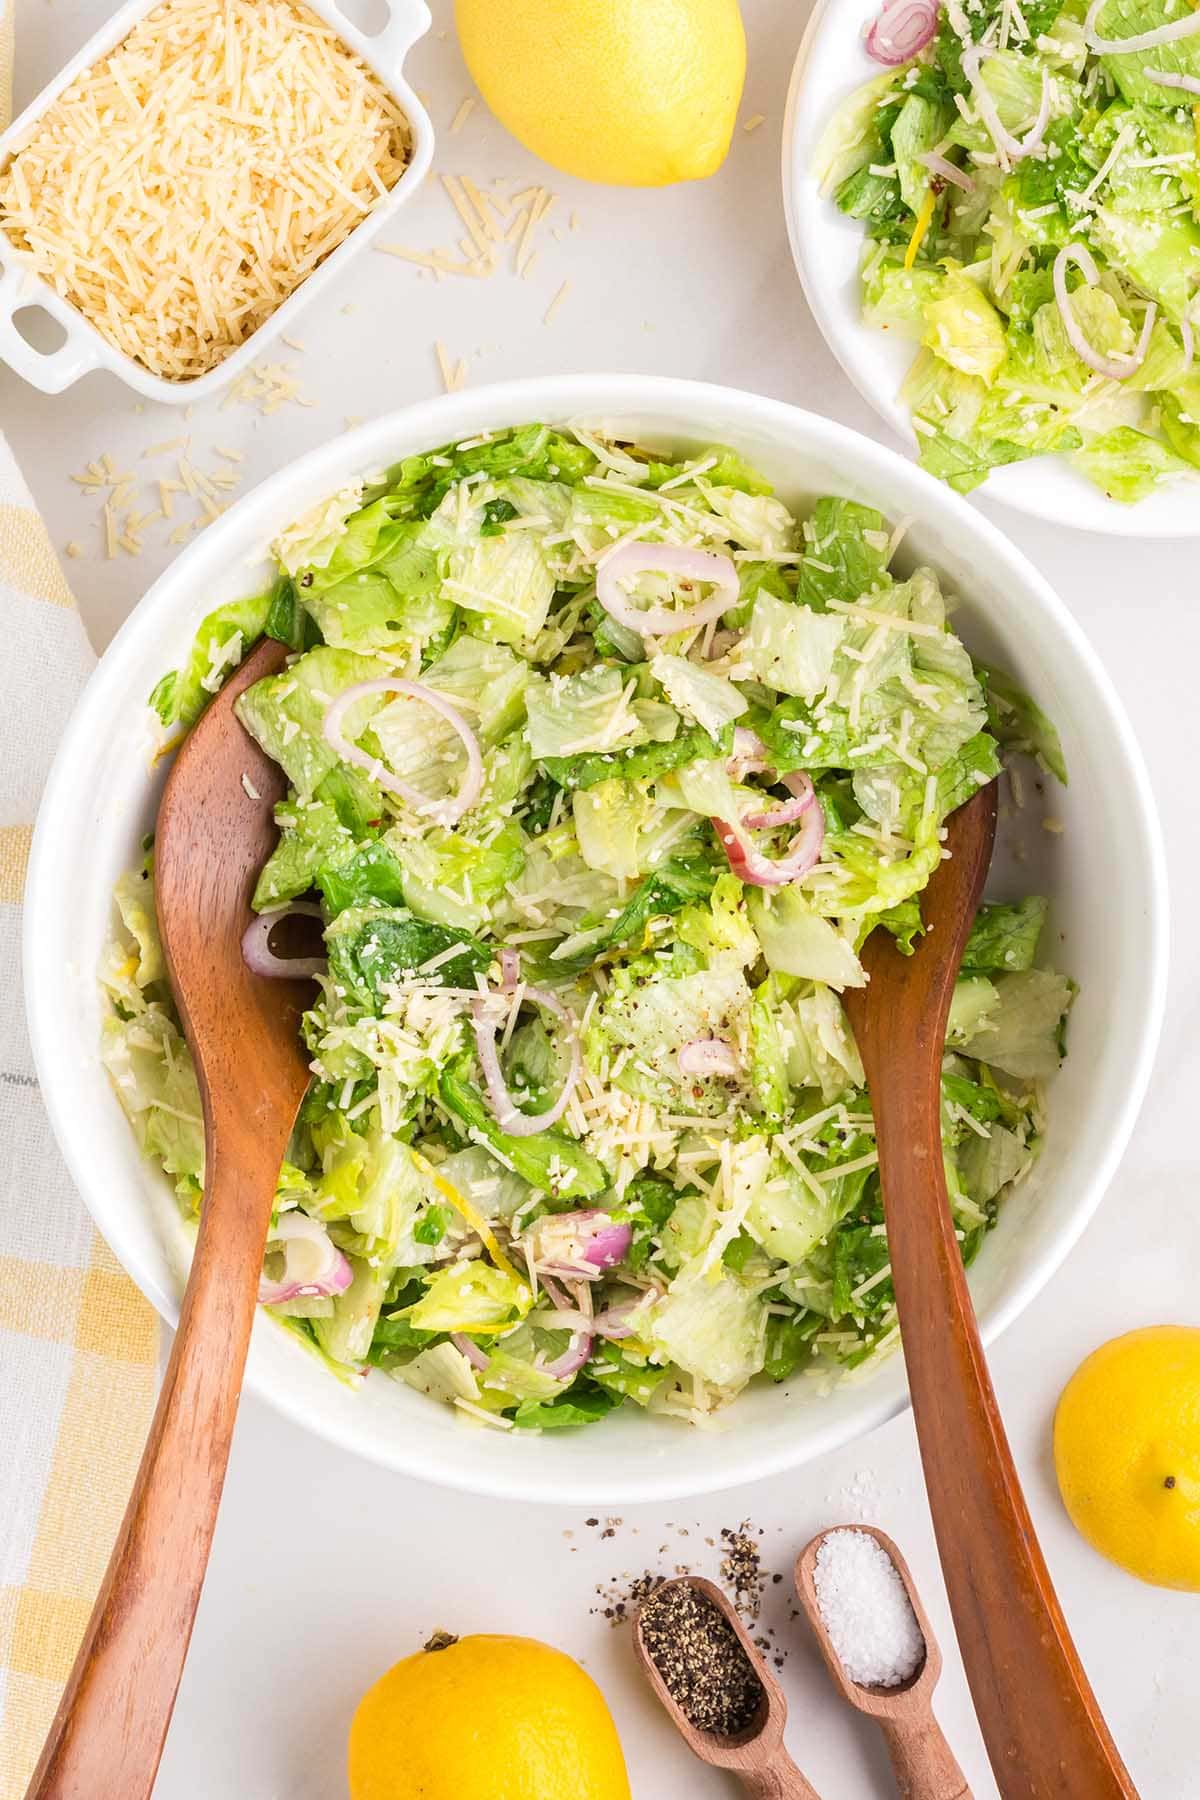 Lemon Parmesan Salad in a white bowl with 2 wooden spoon.